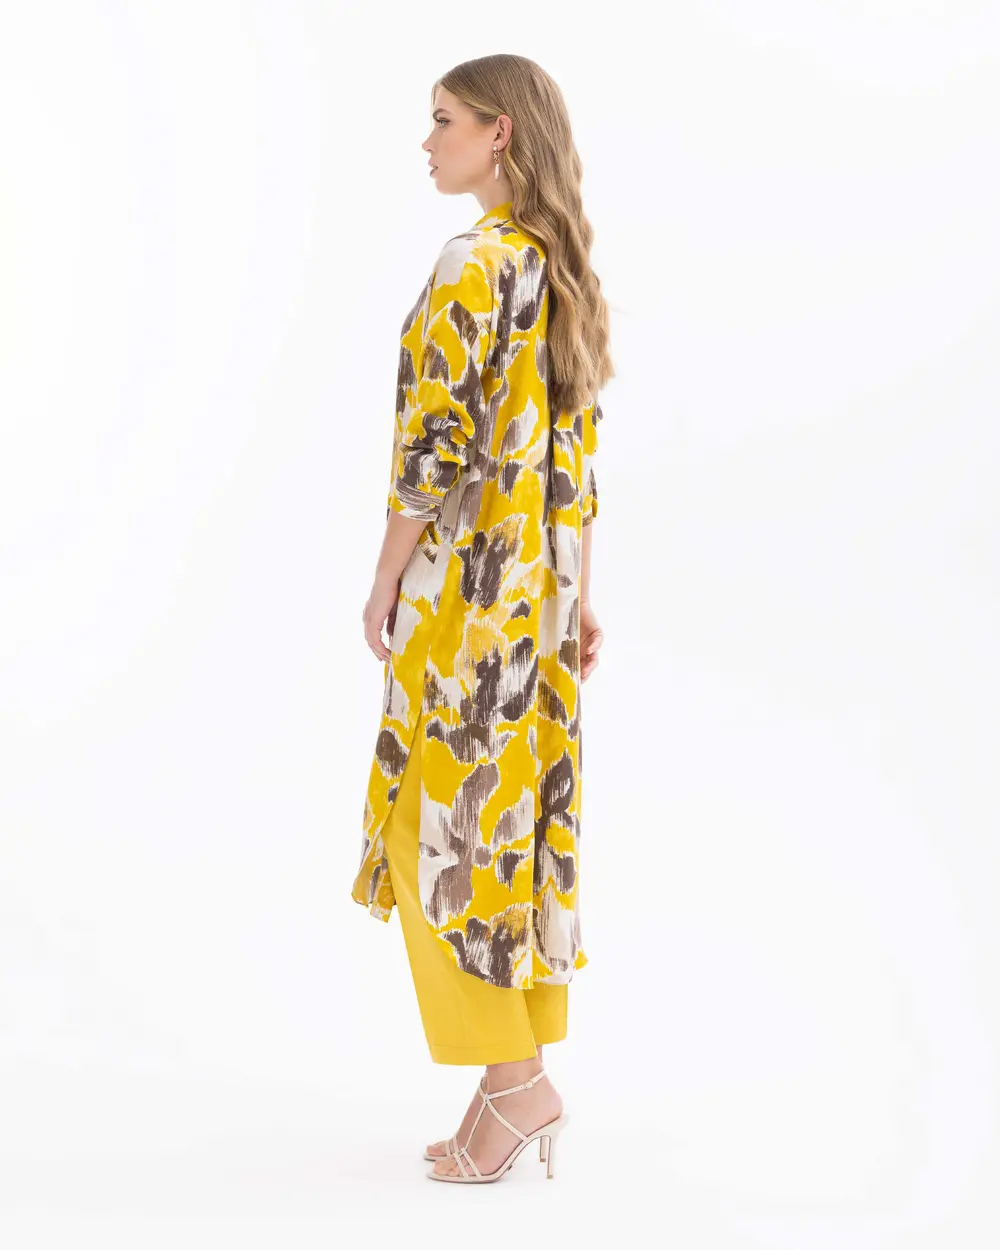 Floral Patterned Tunic with Slit Detail